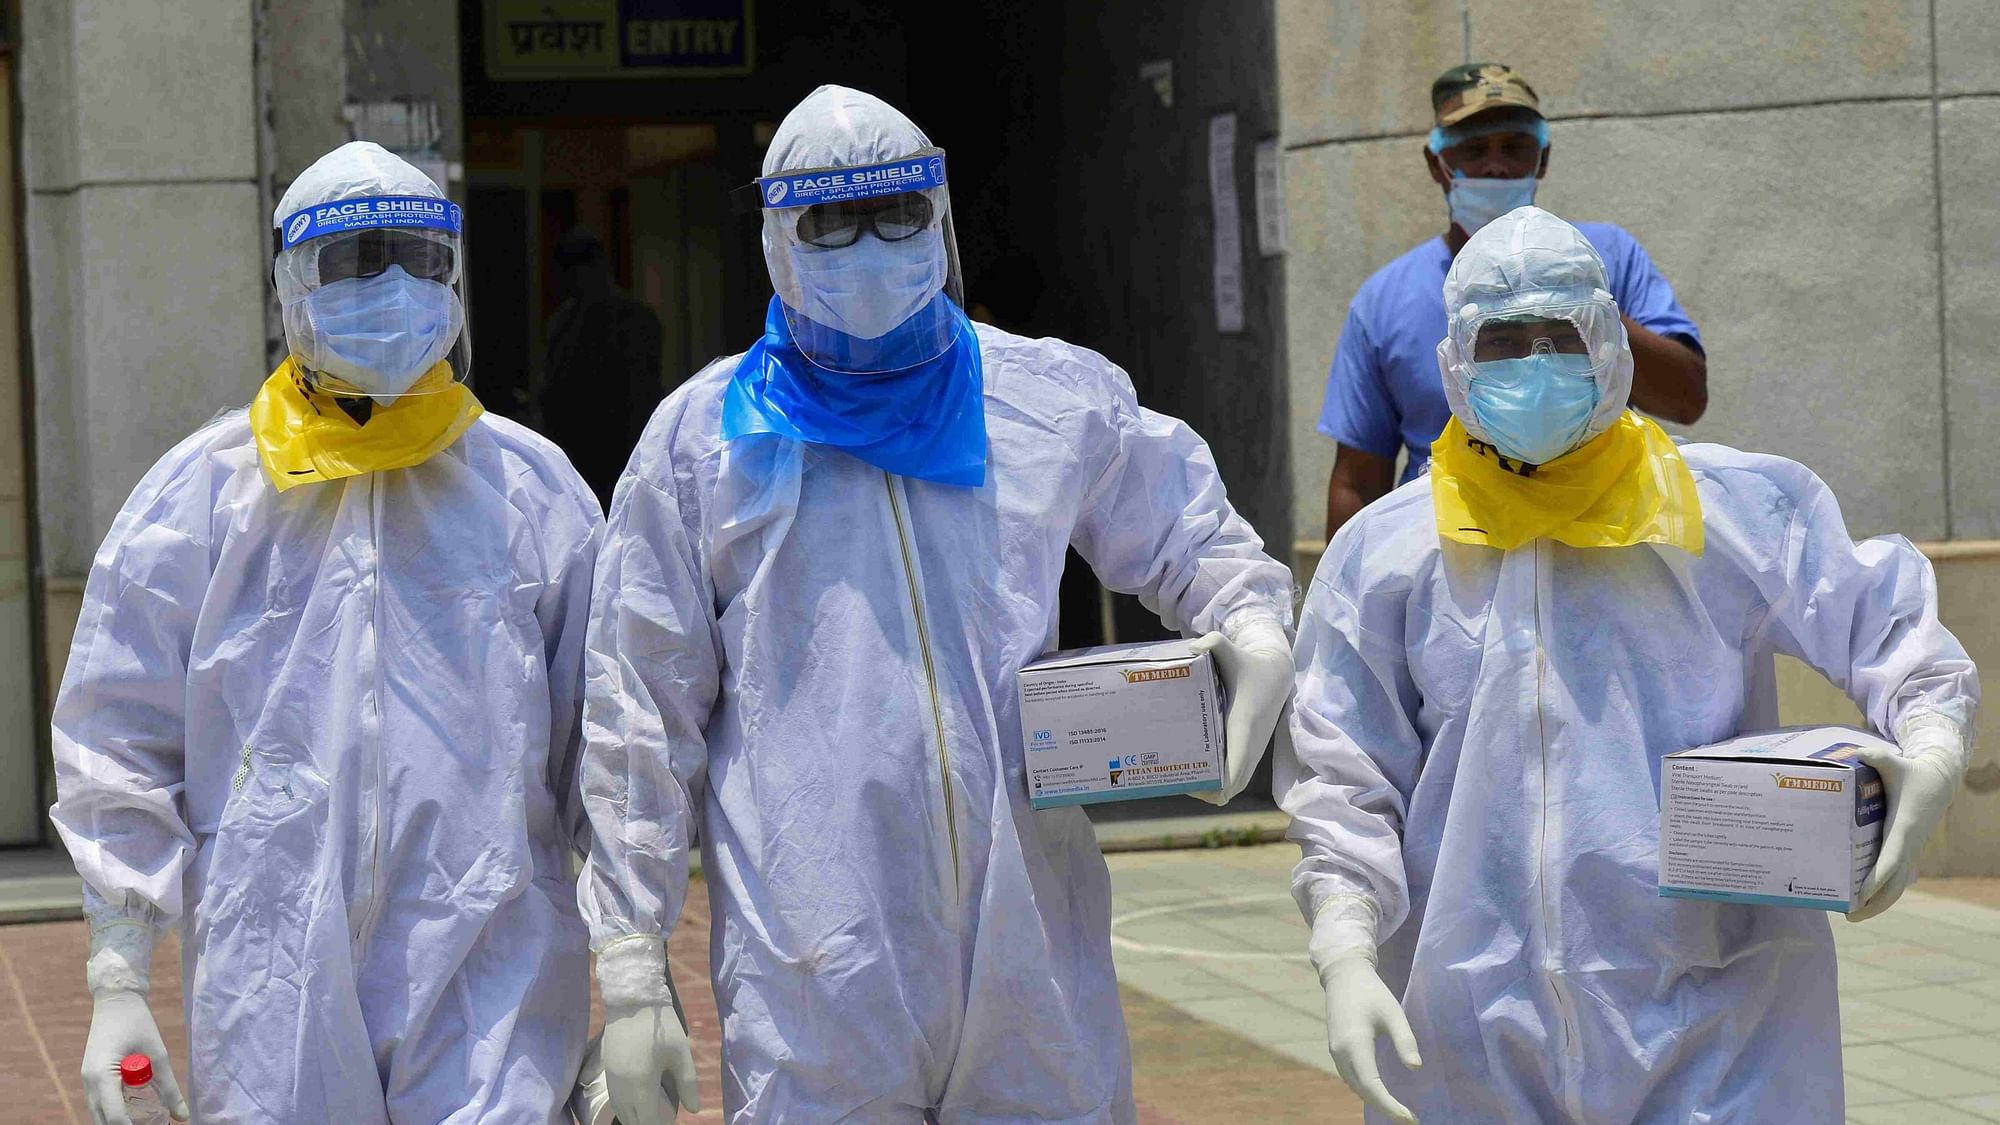 Medics arrive to take samples of suspected COVID-19 patients for lab tests at a government hospital in New Delhi.&nbsp; Image used for representational purpose.